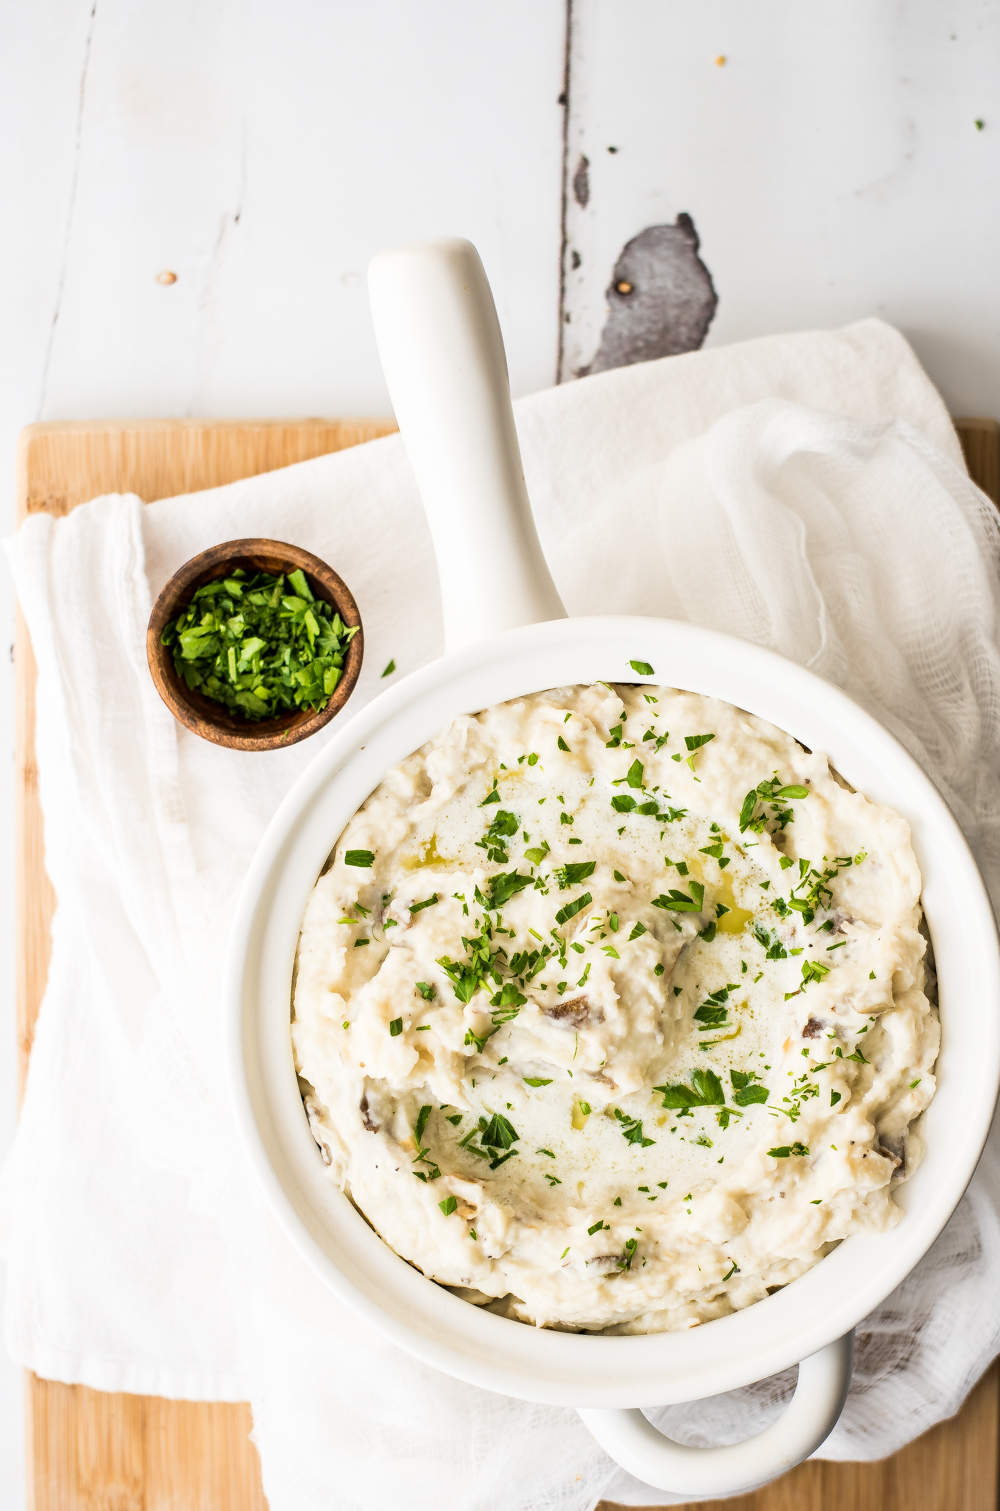 Whipped Root Vegetable Mash with Herb Beer Butter is the perfect side dish for your Thanksgiving spreads! Parsnips and turnips bring this recipe to life!